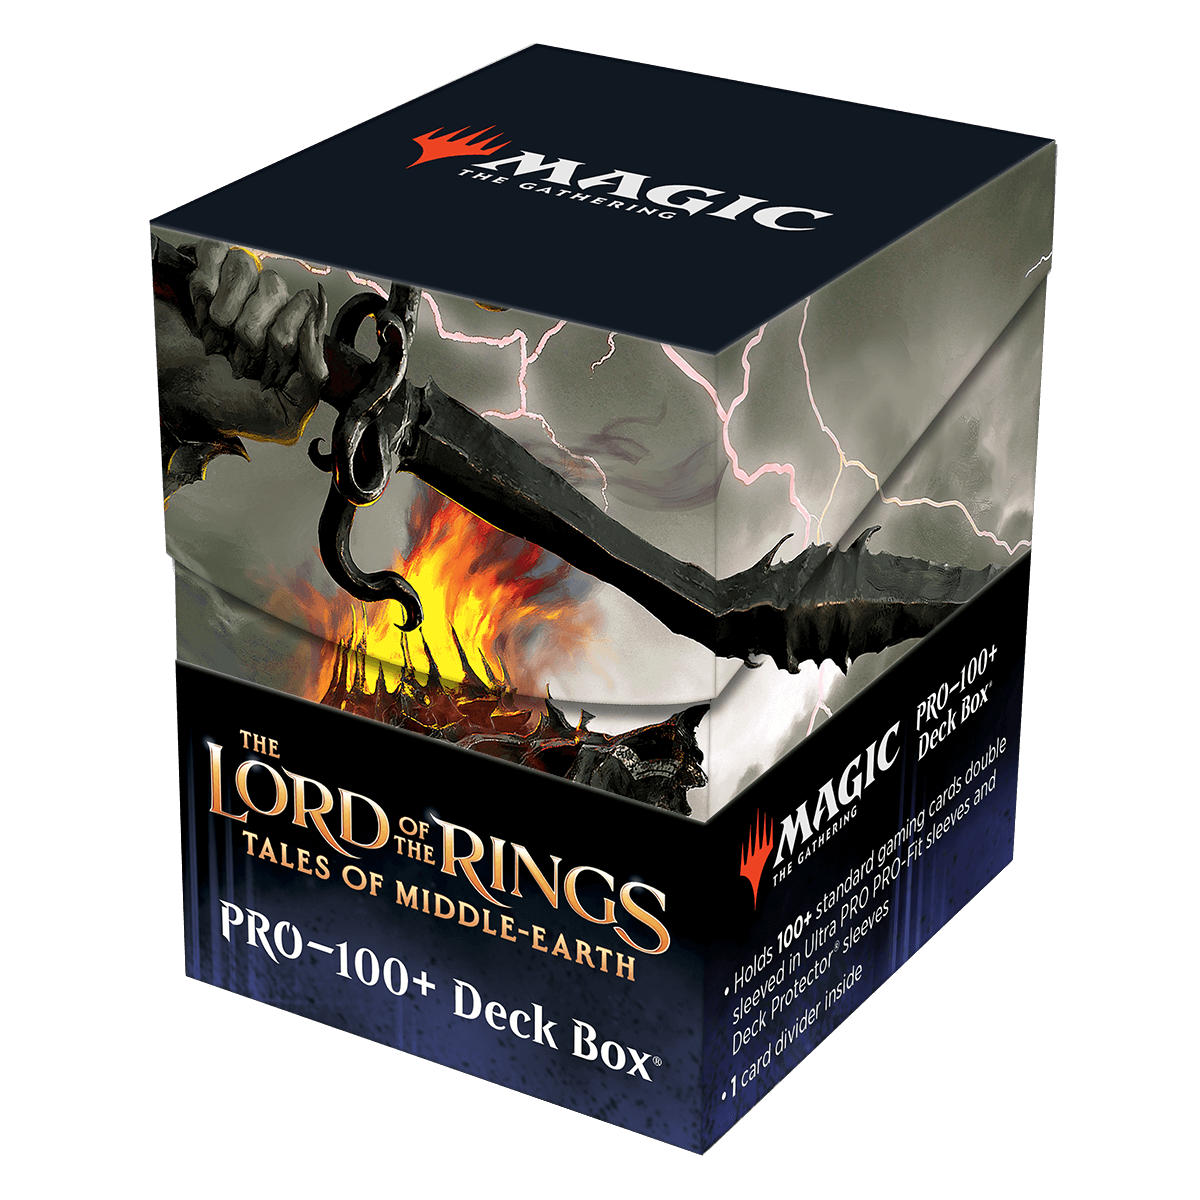 Ultra PRO: 100+ Deck Box - The Lord of the Rings (Sauron, Lord of the Rings)